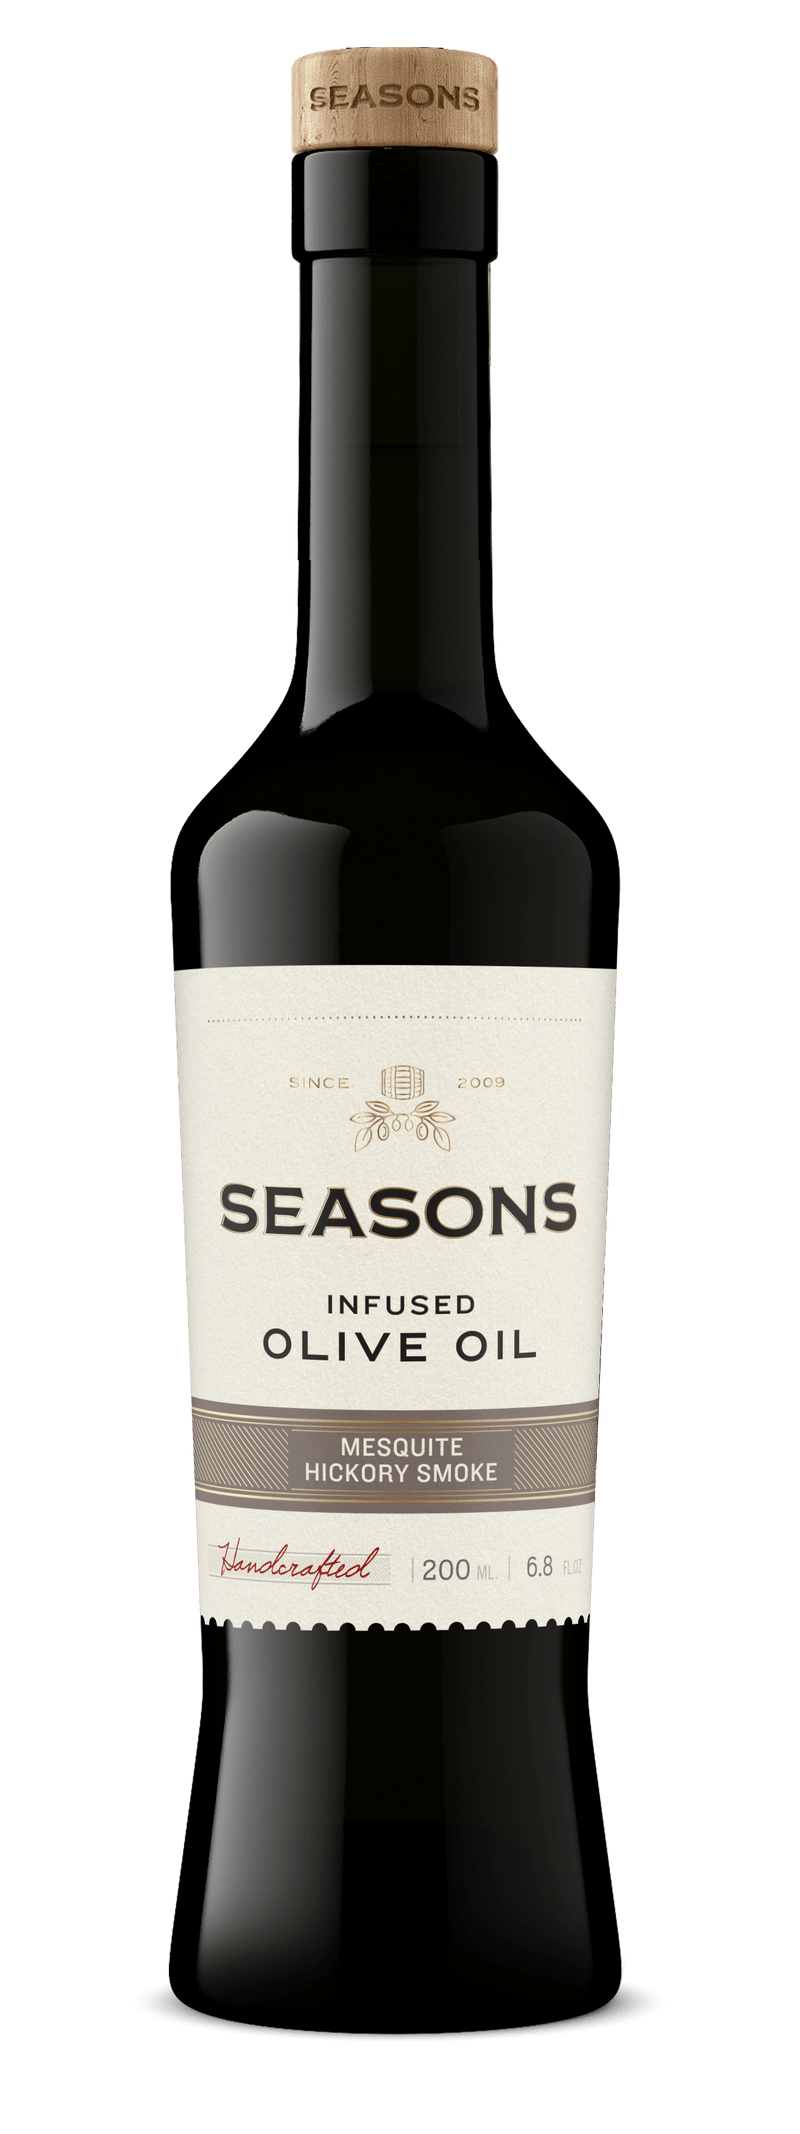 Seasons Infused Olive Oil 375mL Mesquite Hickory Smoke